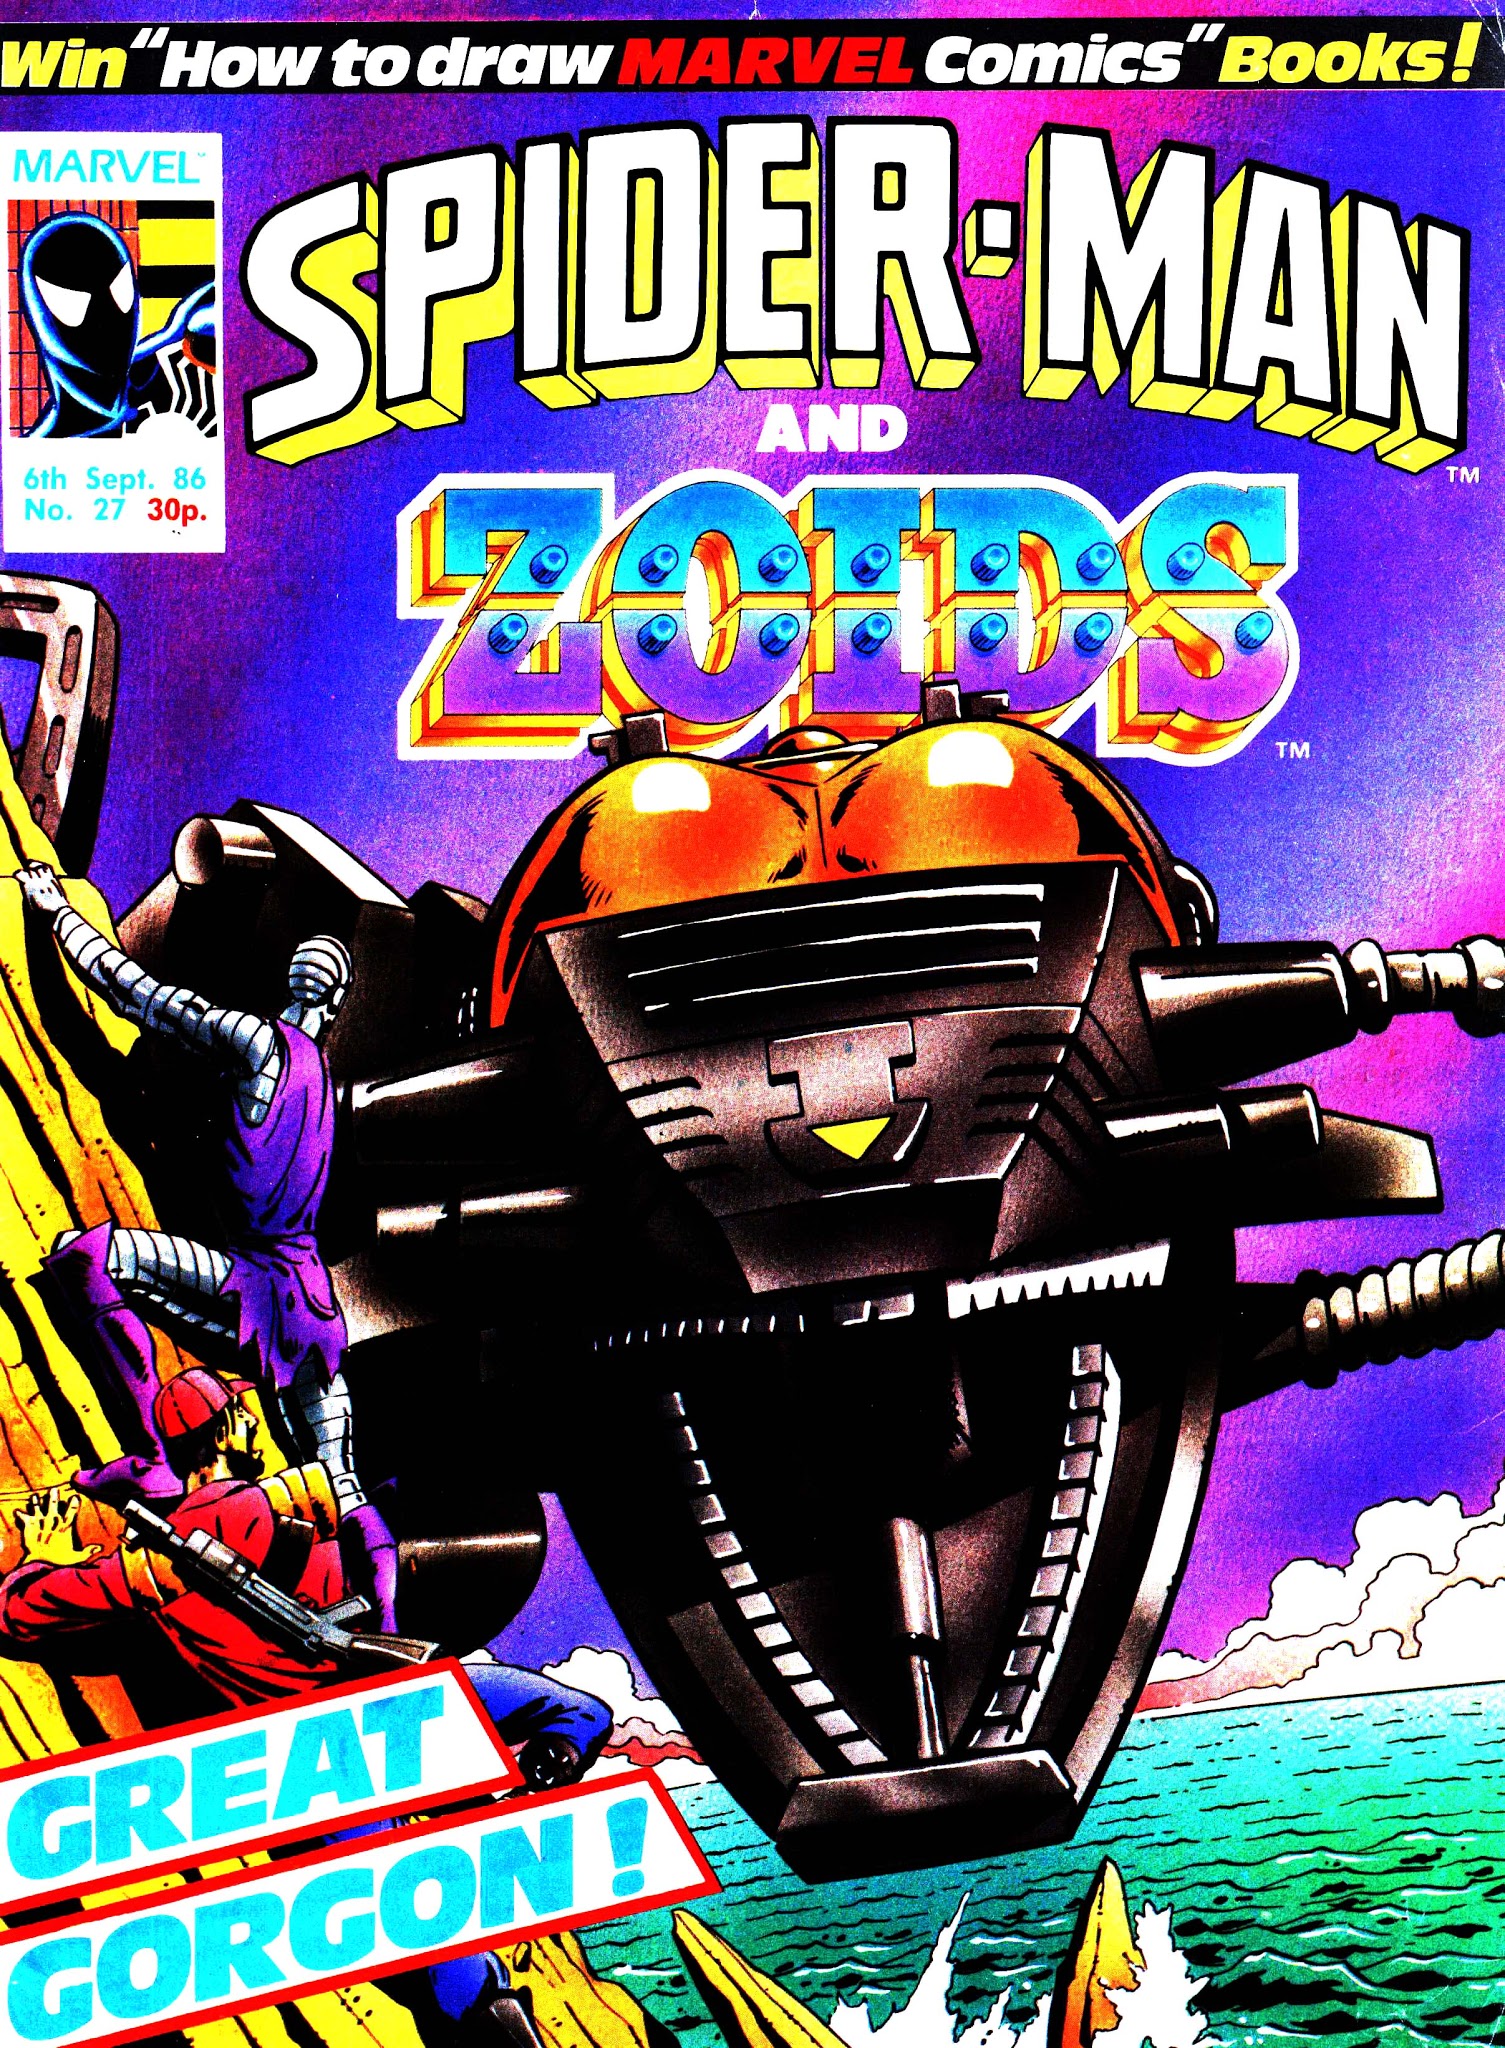 Read online Spider-Man and Zoids comic -  Issue #27 - 1